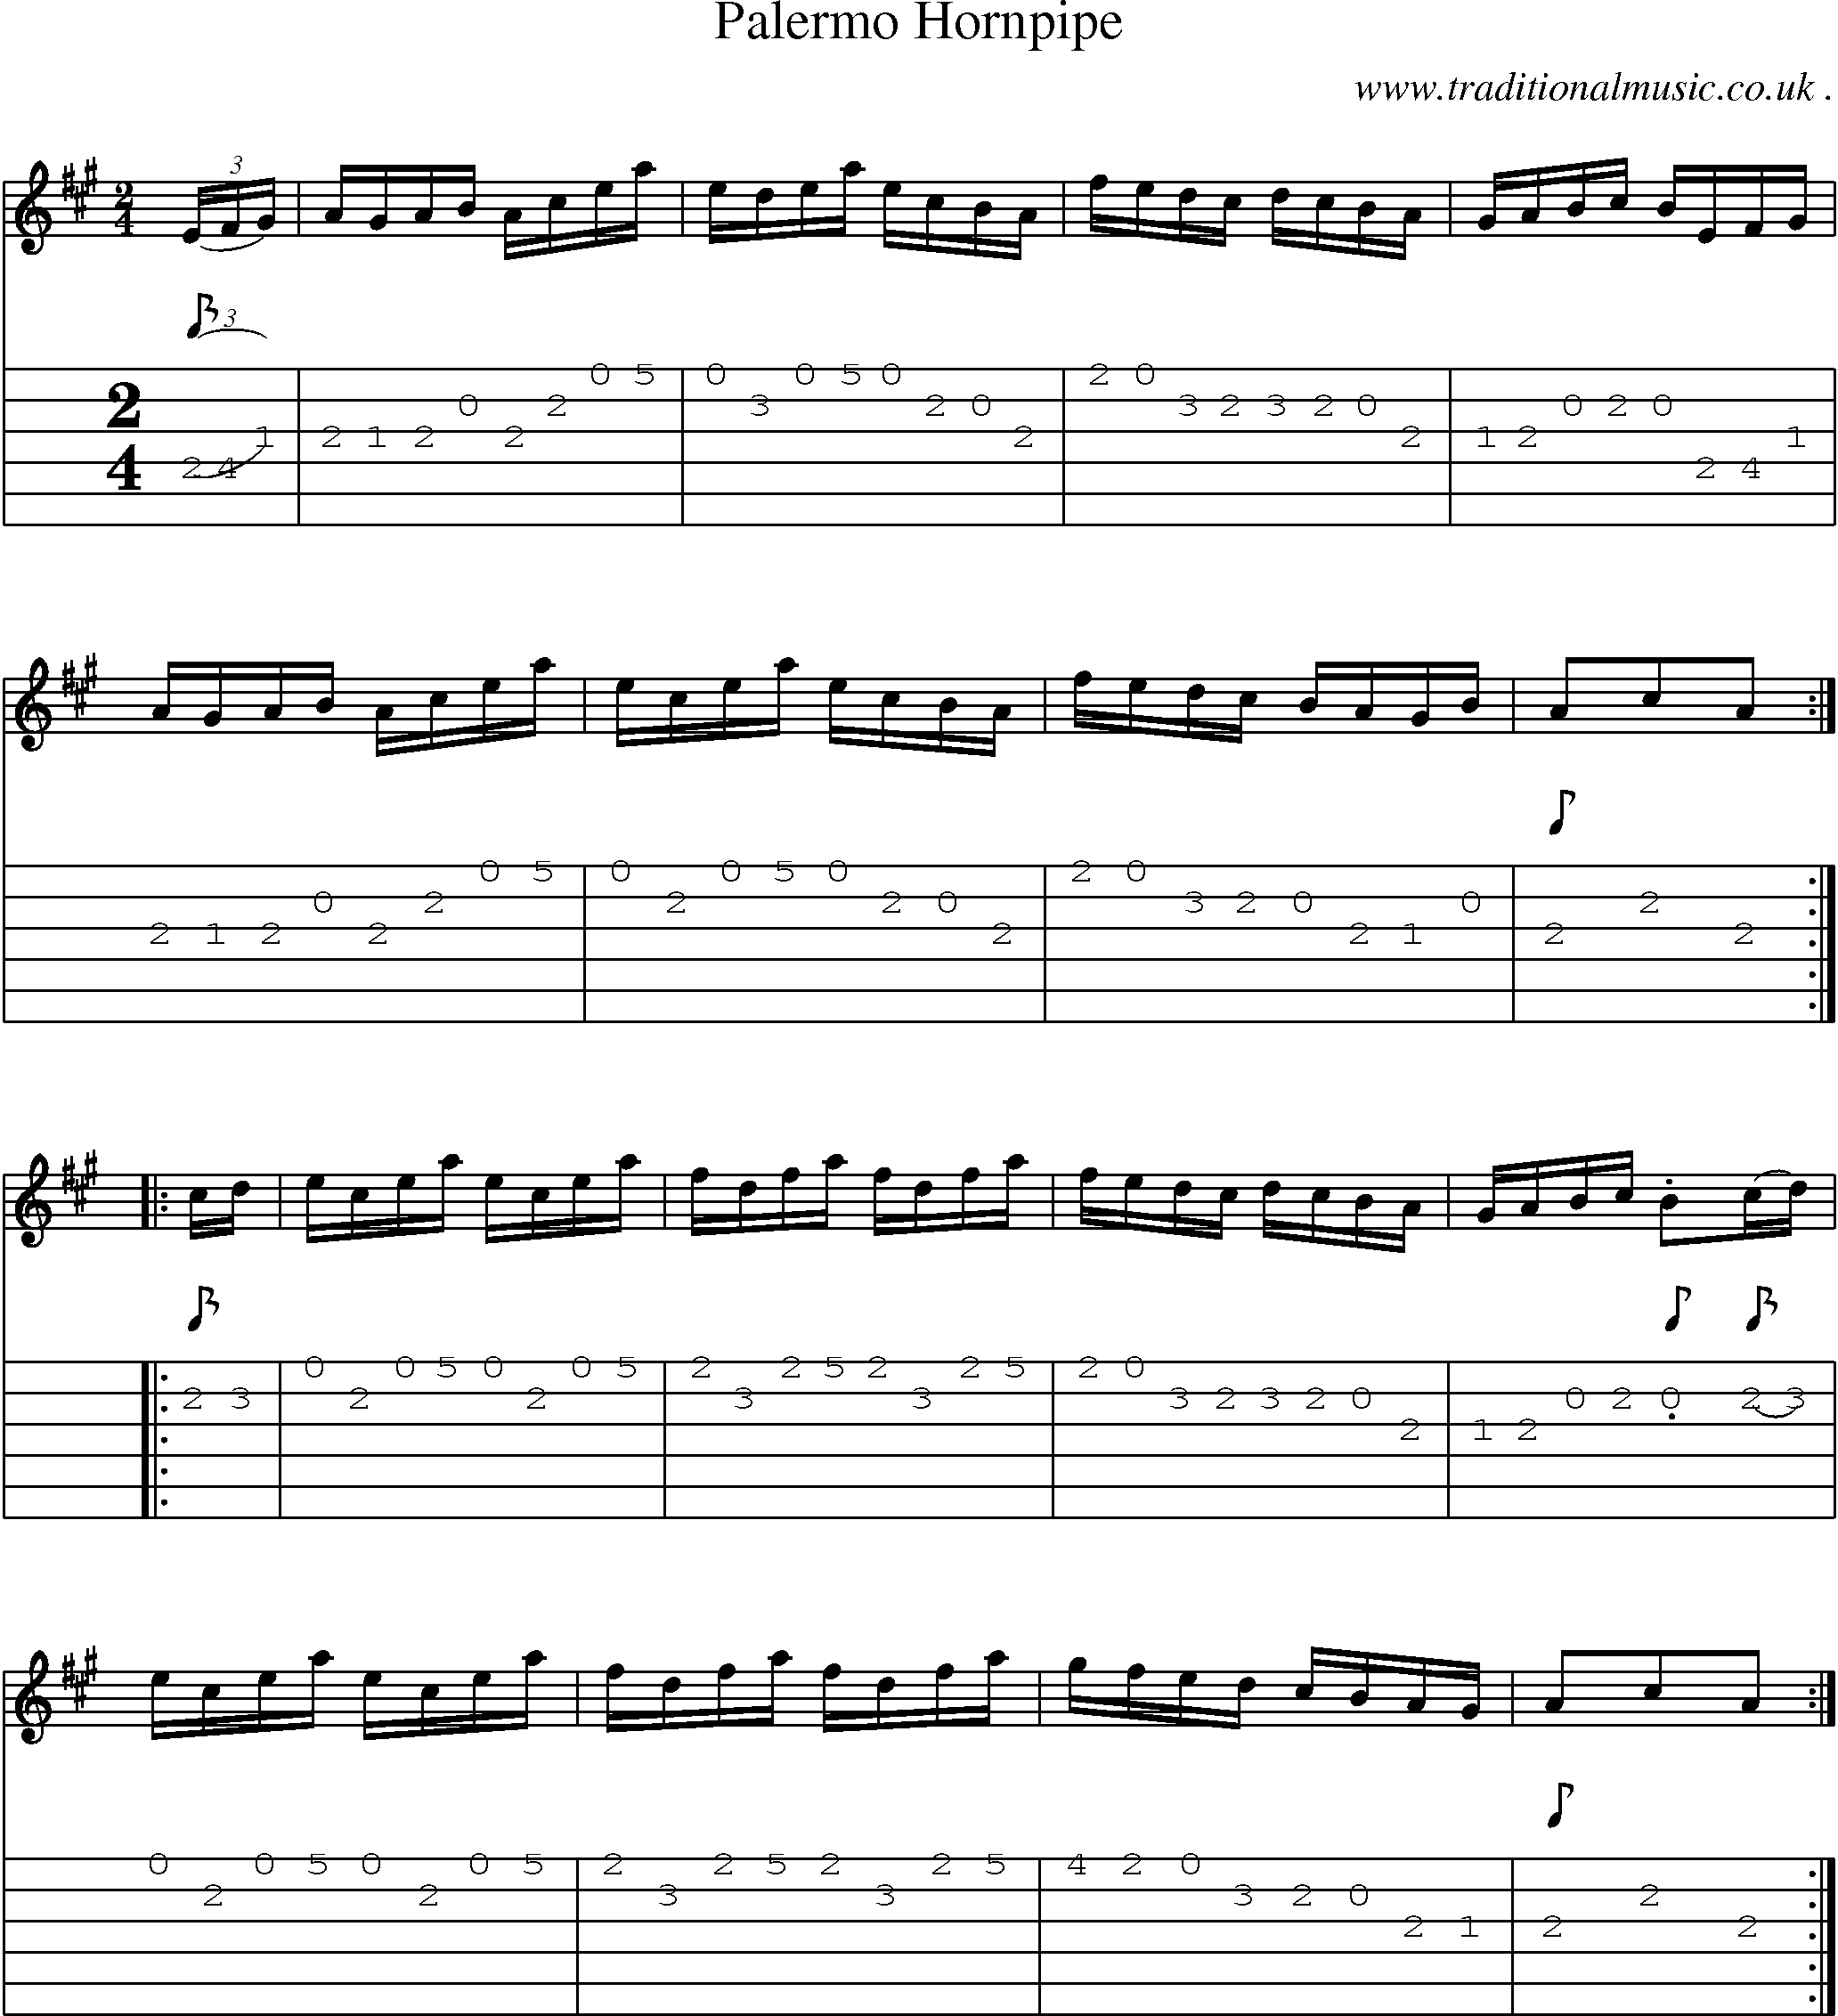 Sheet-Music and Guitar Tabs for Palermo Hornpipe